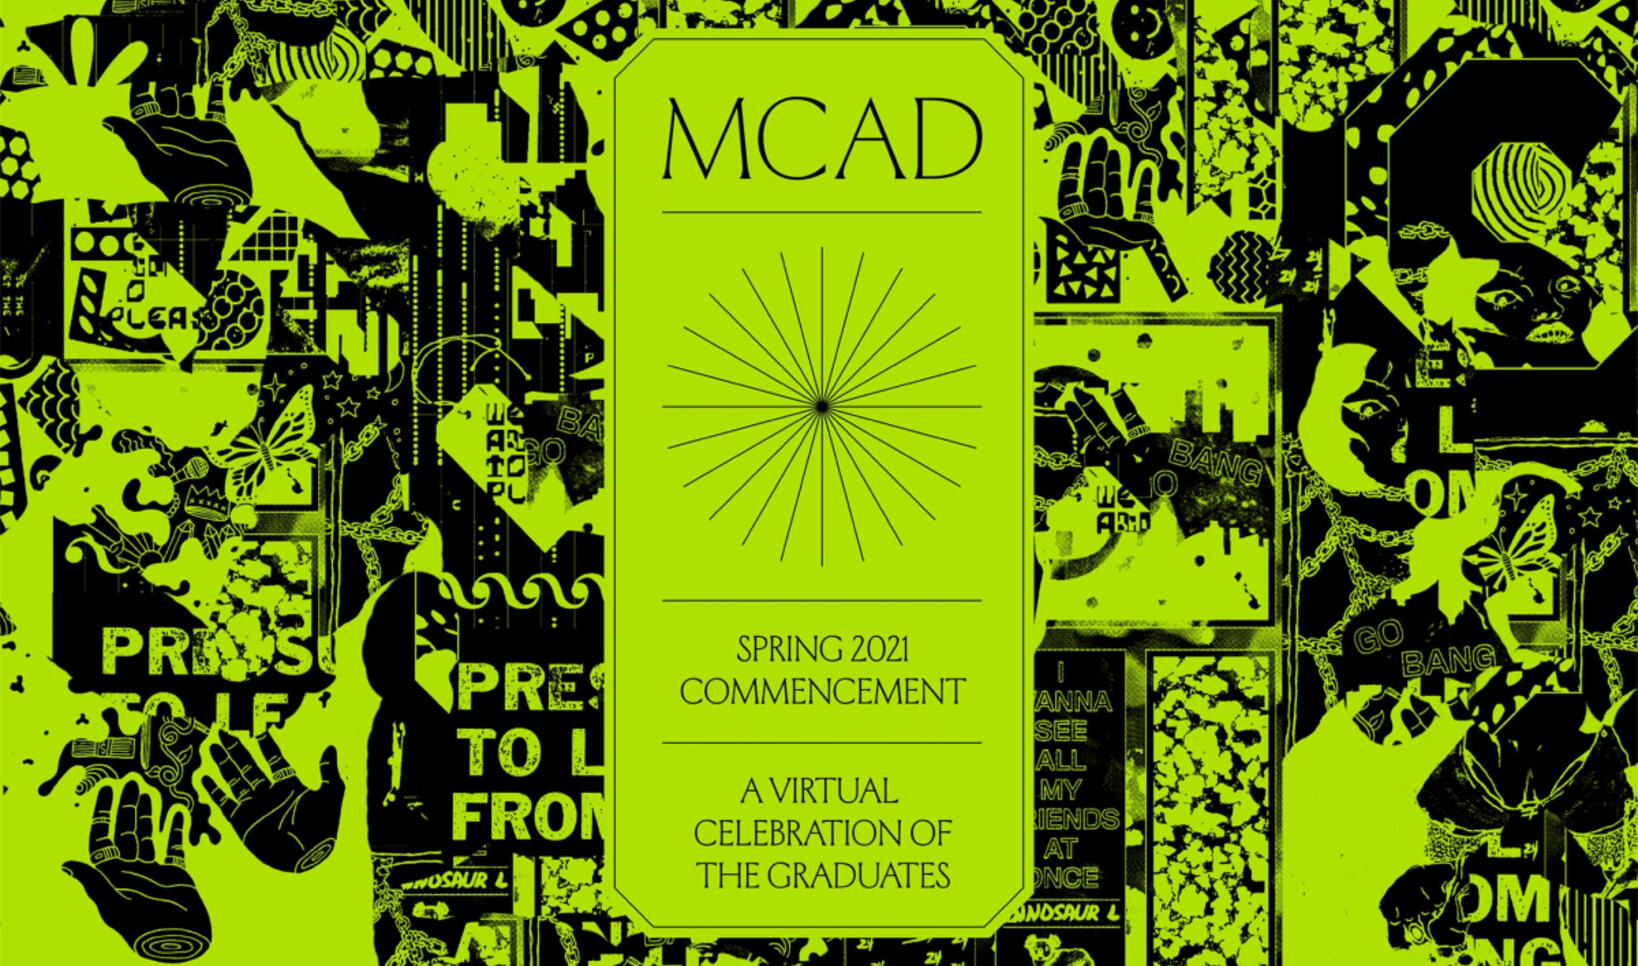 MCAD Spring 2021 Commencement